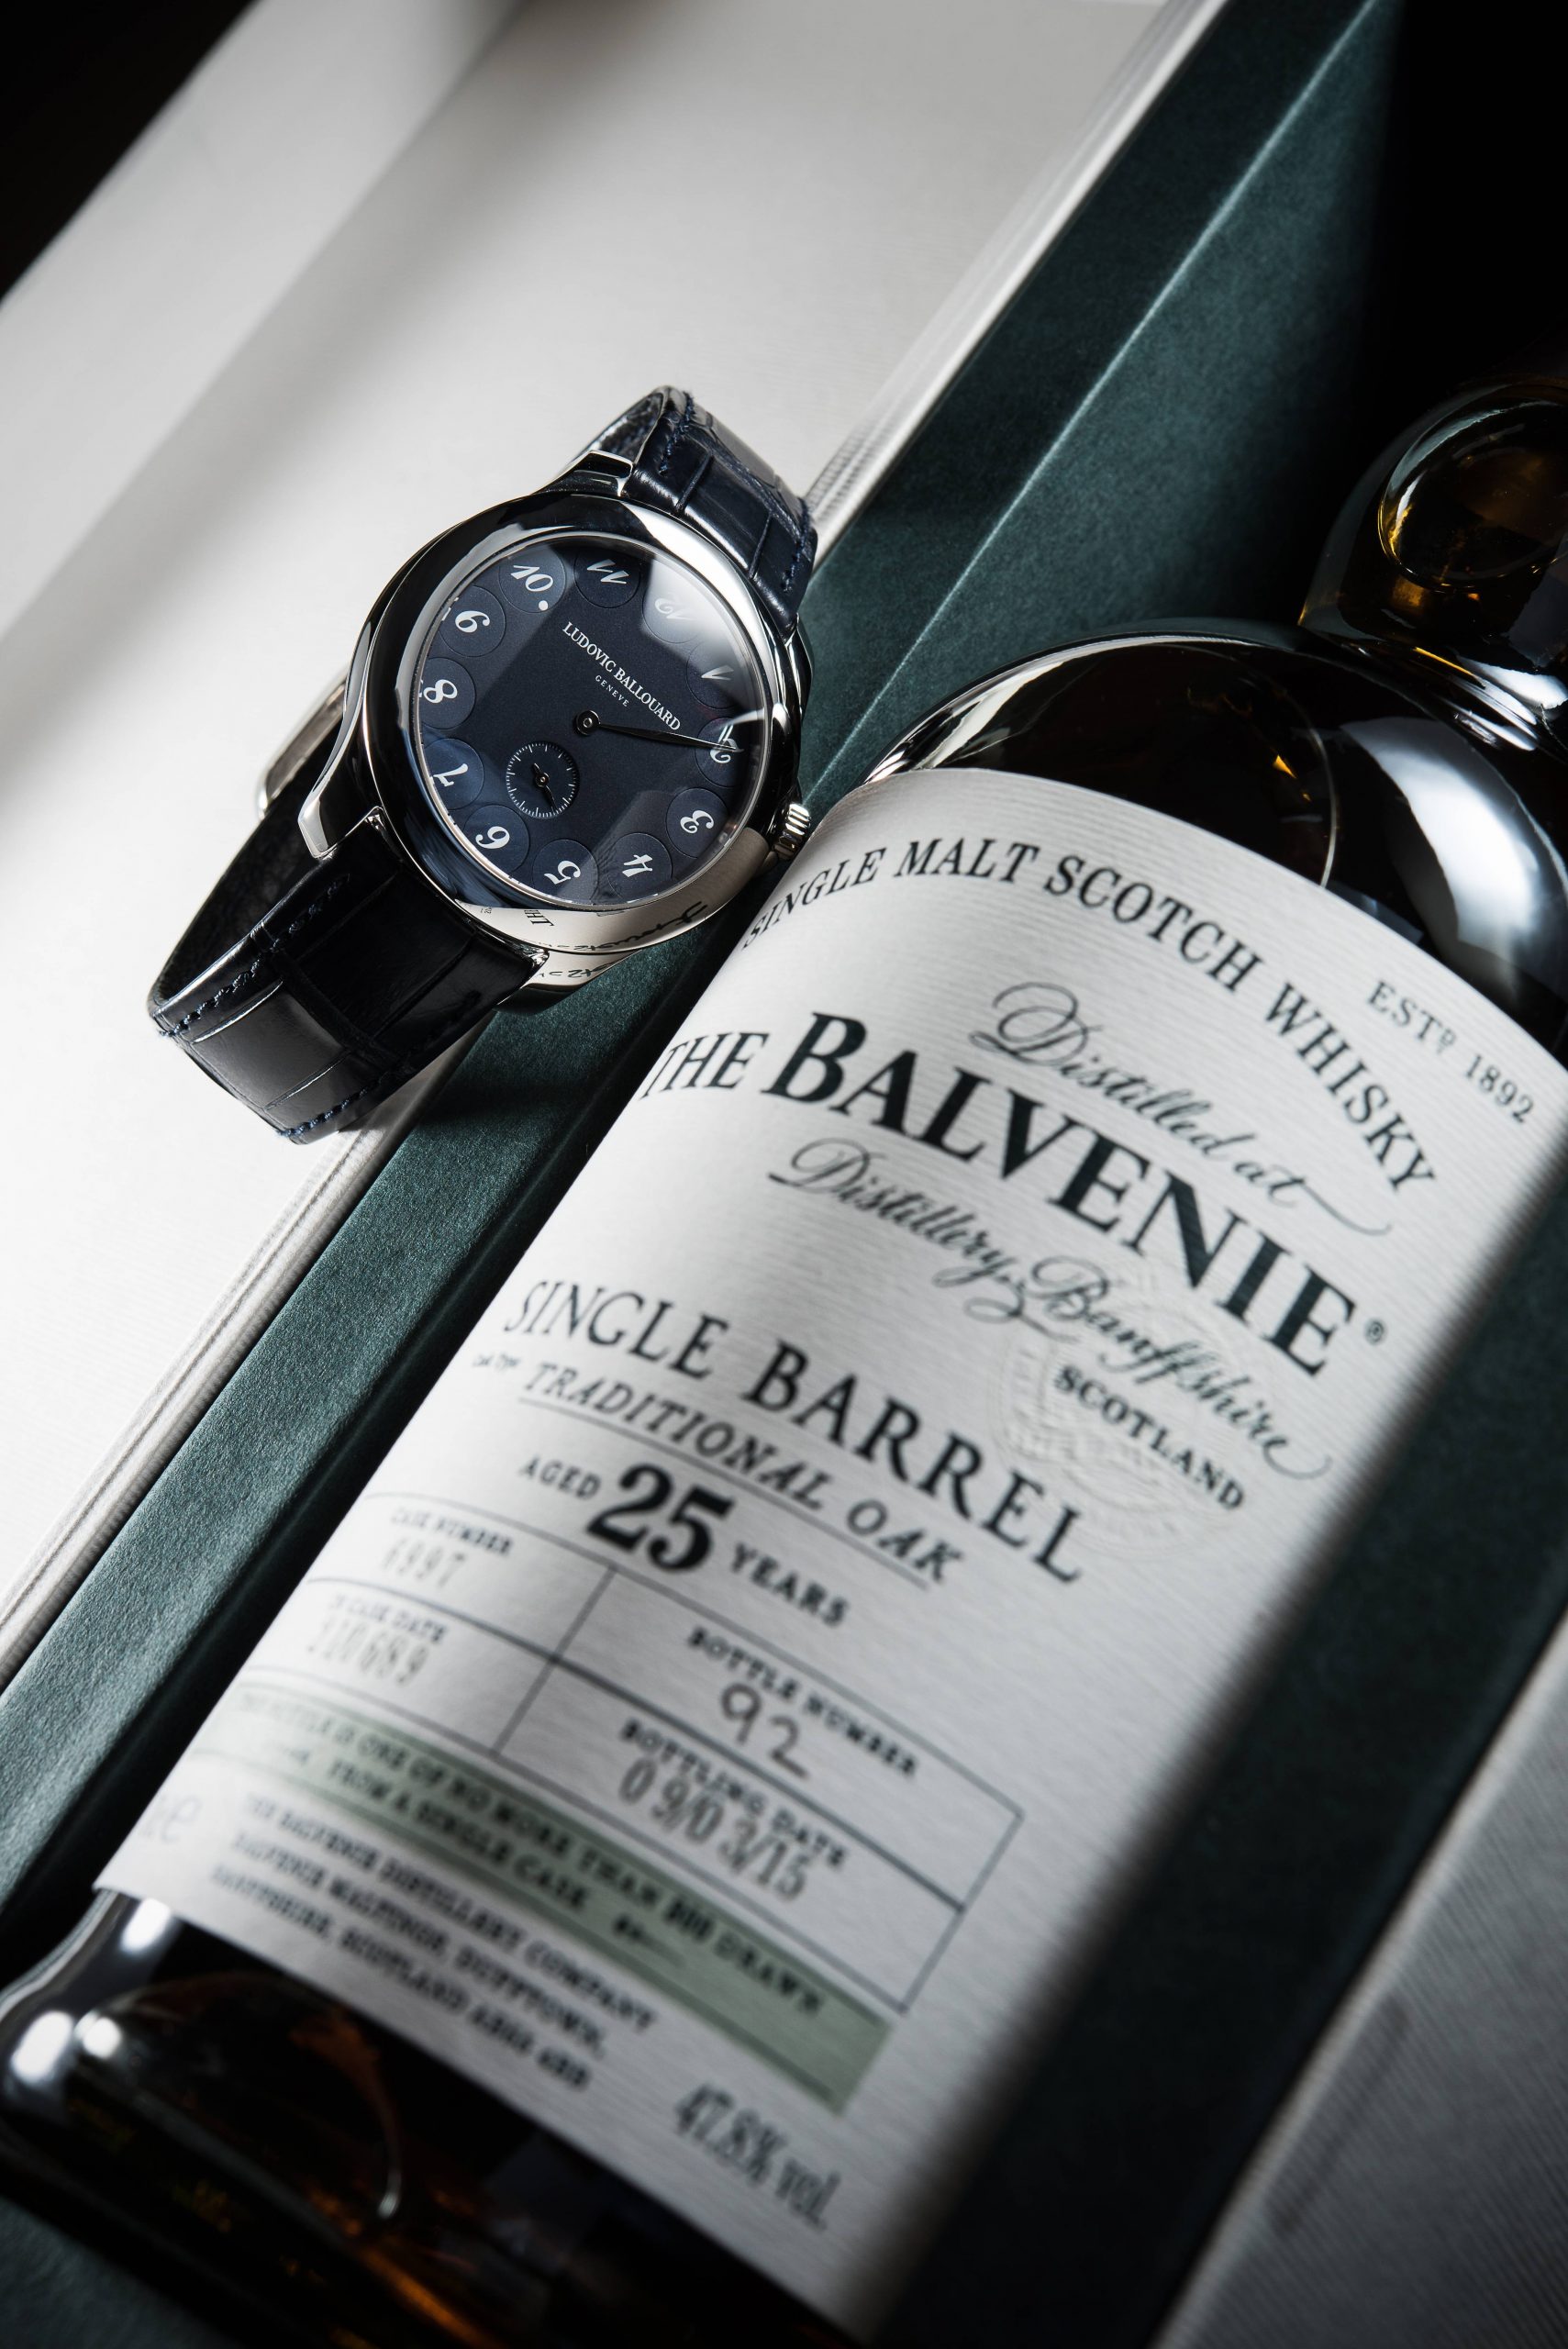 Watches & Whisky: Turning The Balvenie 25 Single Barrel, Upside Down